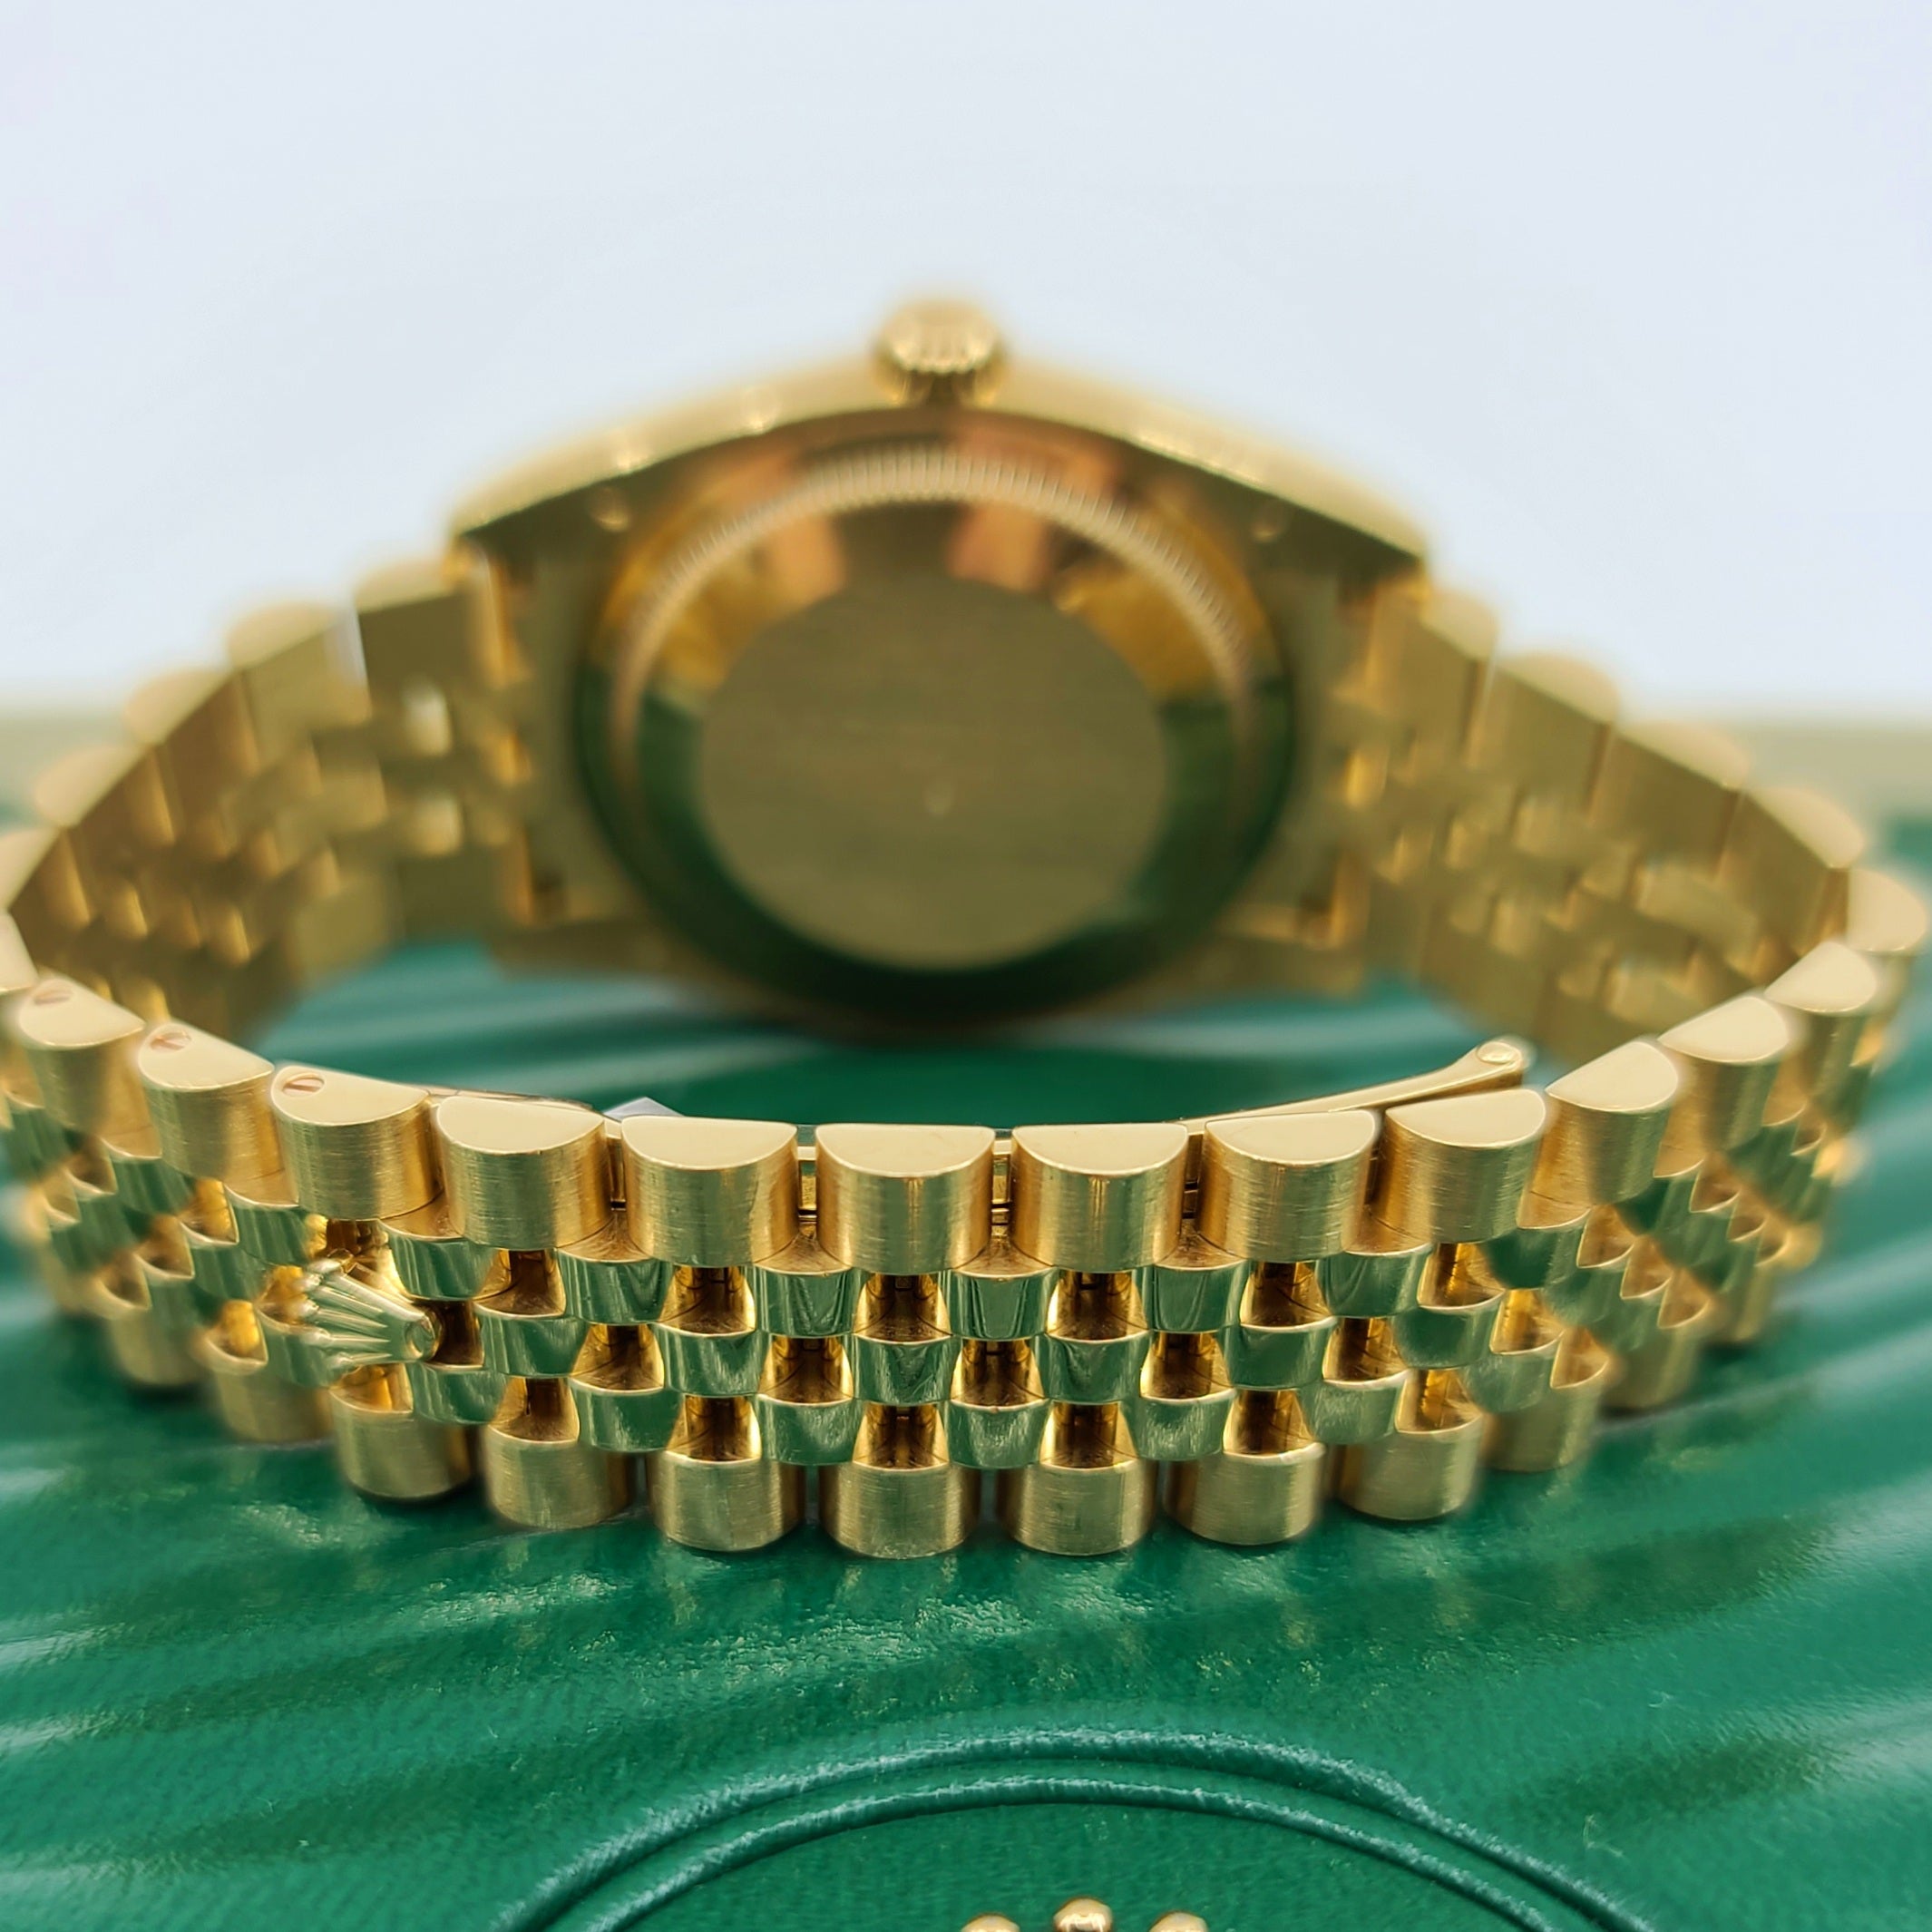 2015 Year Rolex 116238 Datejust 36 Solid Gold Fluted Bezel rolex official price $29,050.00 + tax